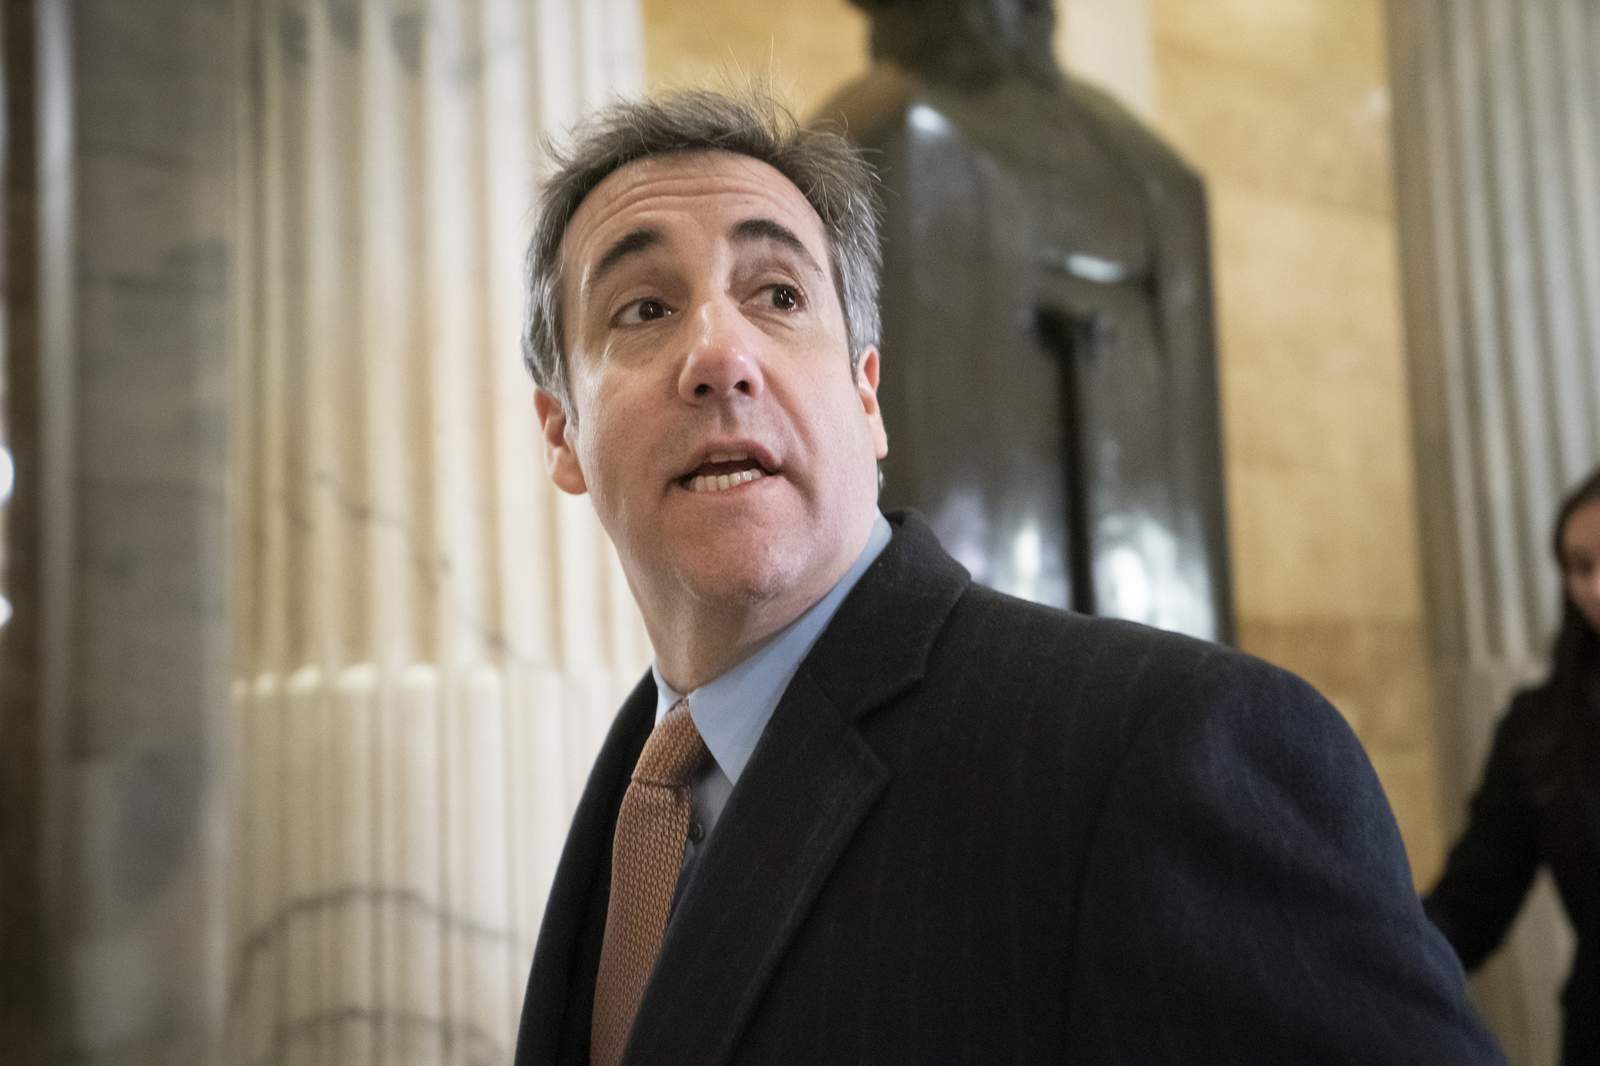 Judge orders release of Trump lawyer Michael Cohen from prison by Friday